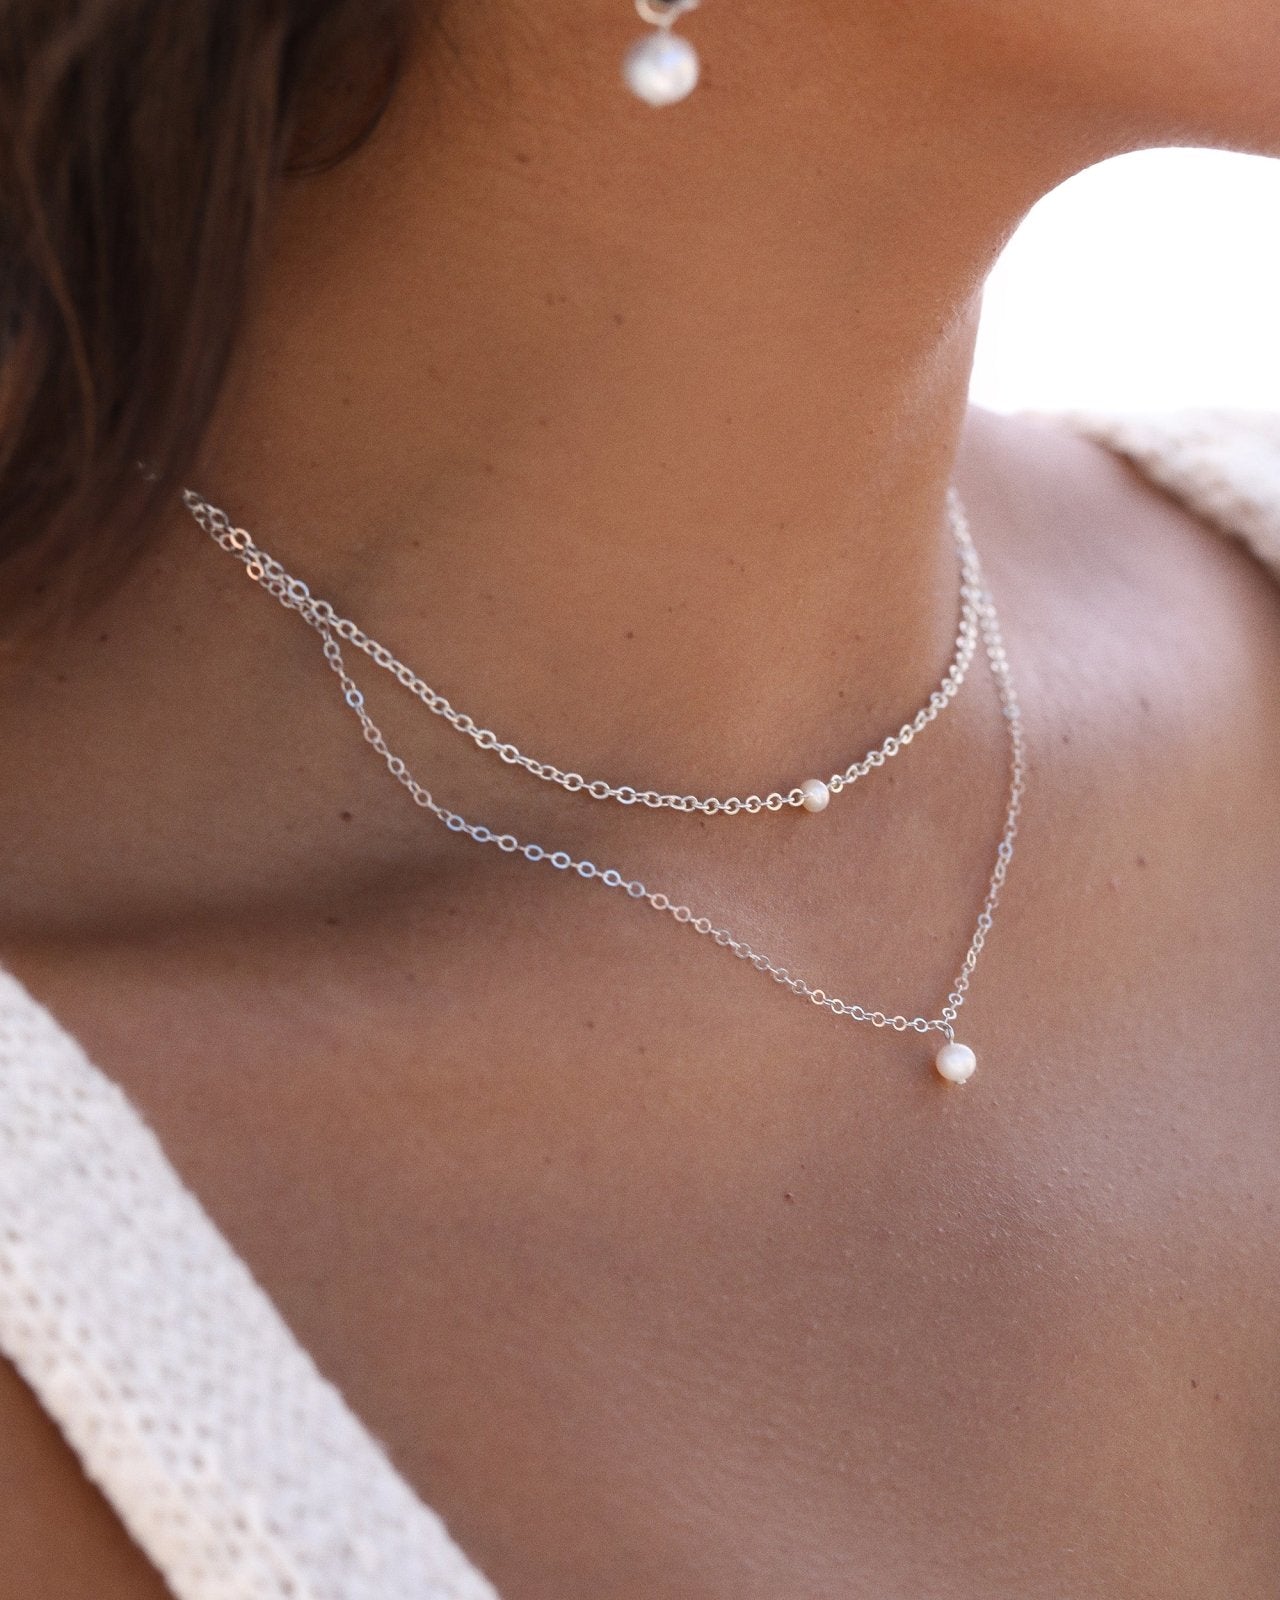 FRESHWATER PEARL NECKLACE - The Littl - Deluxe Chain - 14k Yellow Gold Fill